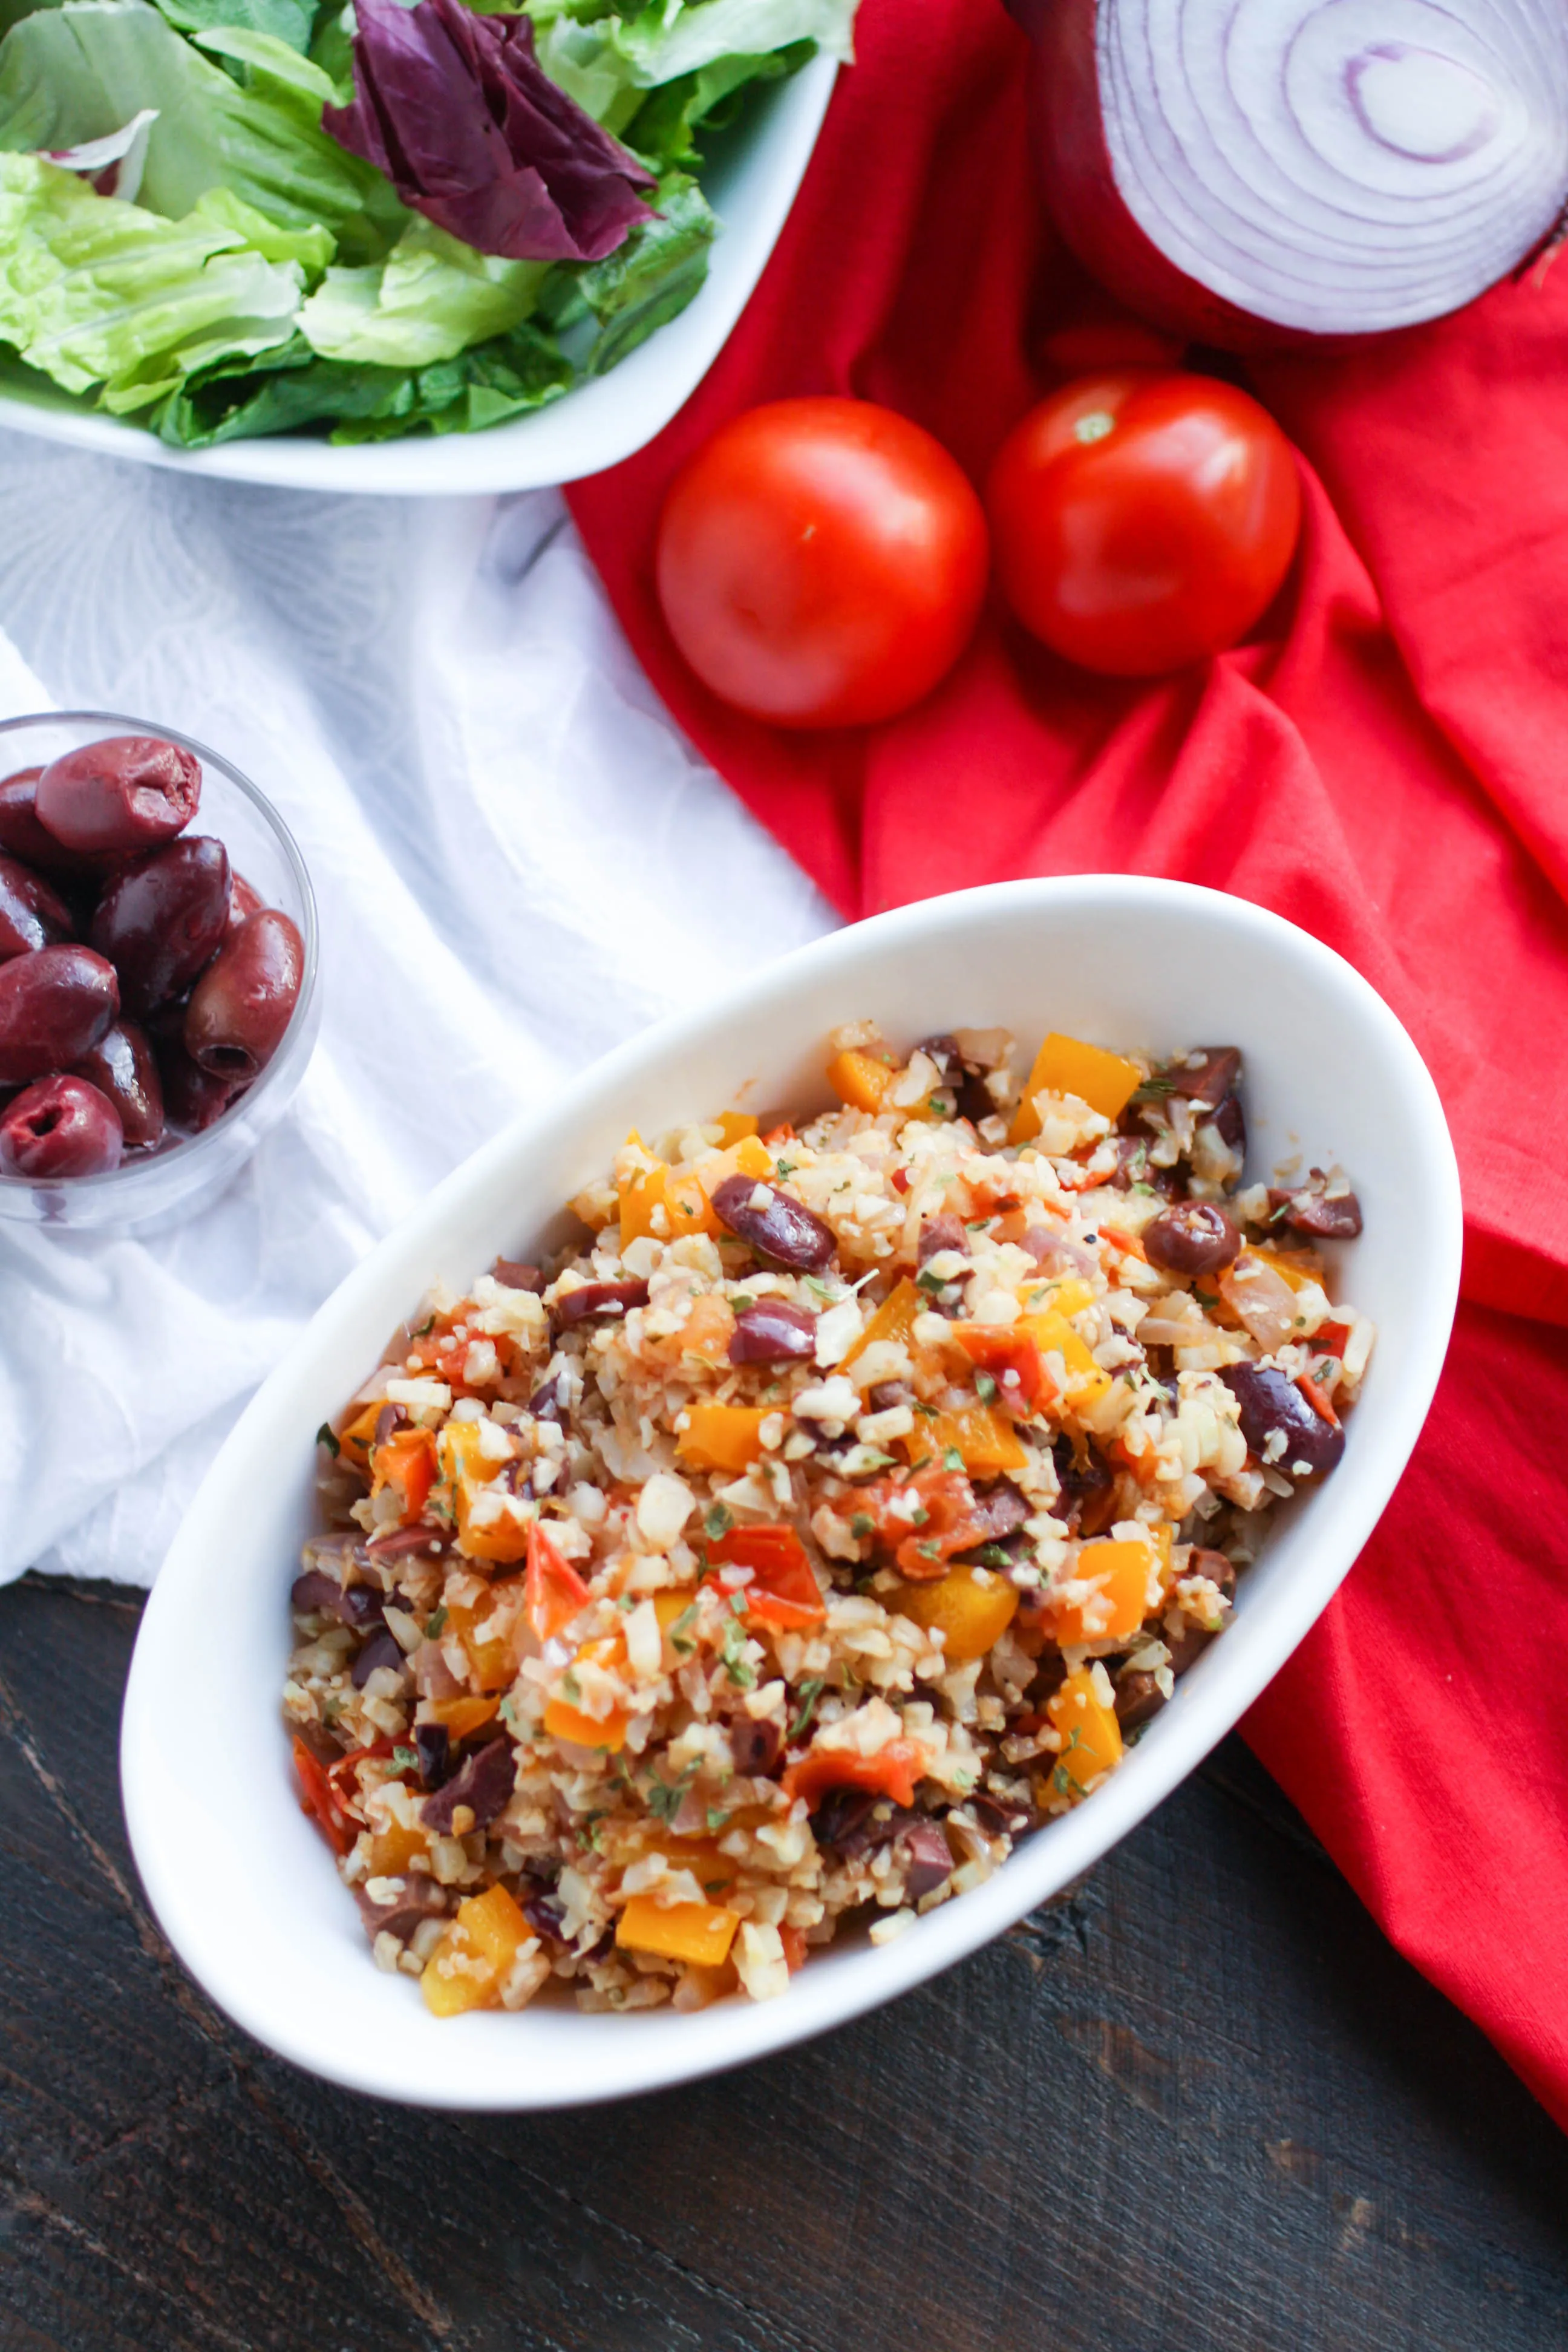 Mediterranean Cauliflower Rice is a healthy and tasty side for any meal. You'll love this flavorful cauliflower rice dish.